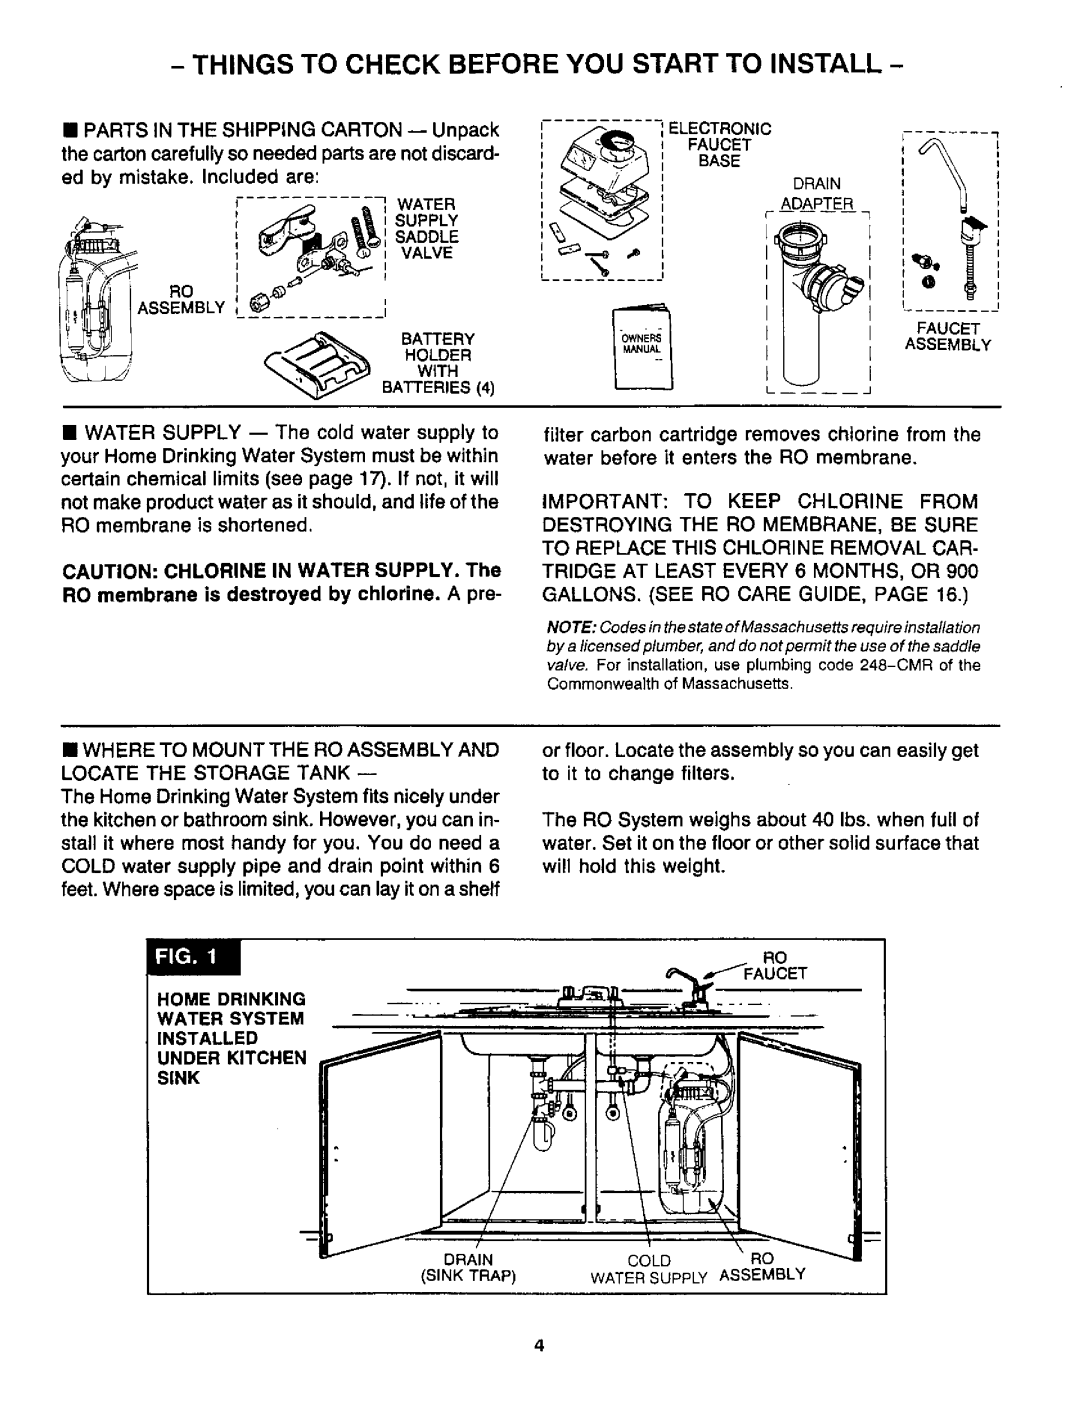 Sears RO 2000 manual Valve, Things To Check Before You Start To Install, Faucet 